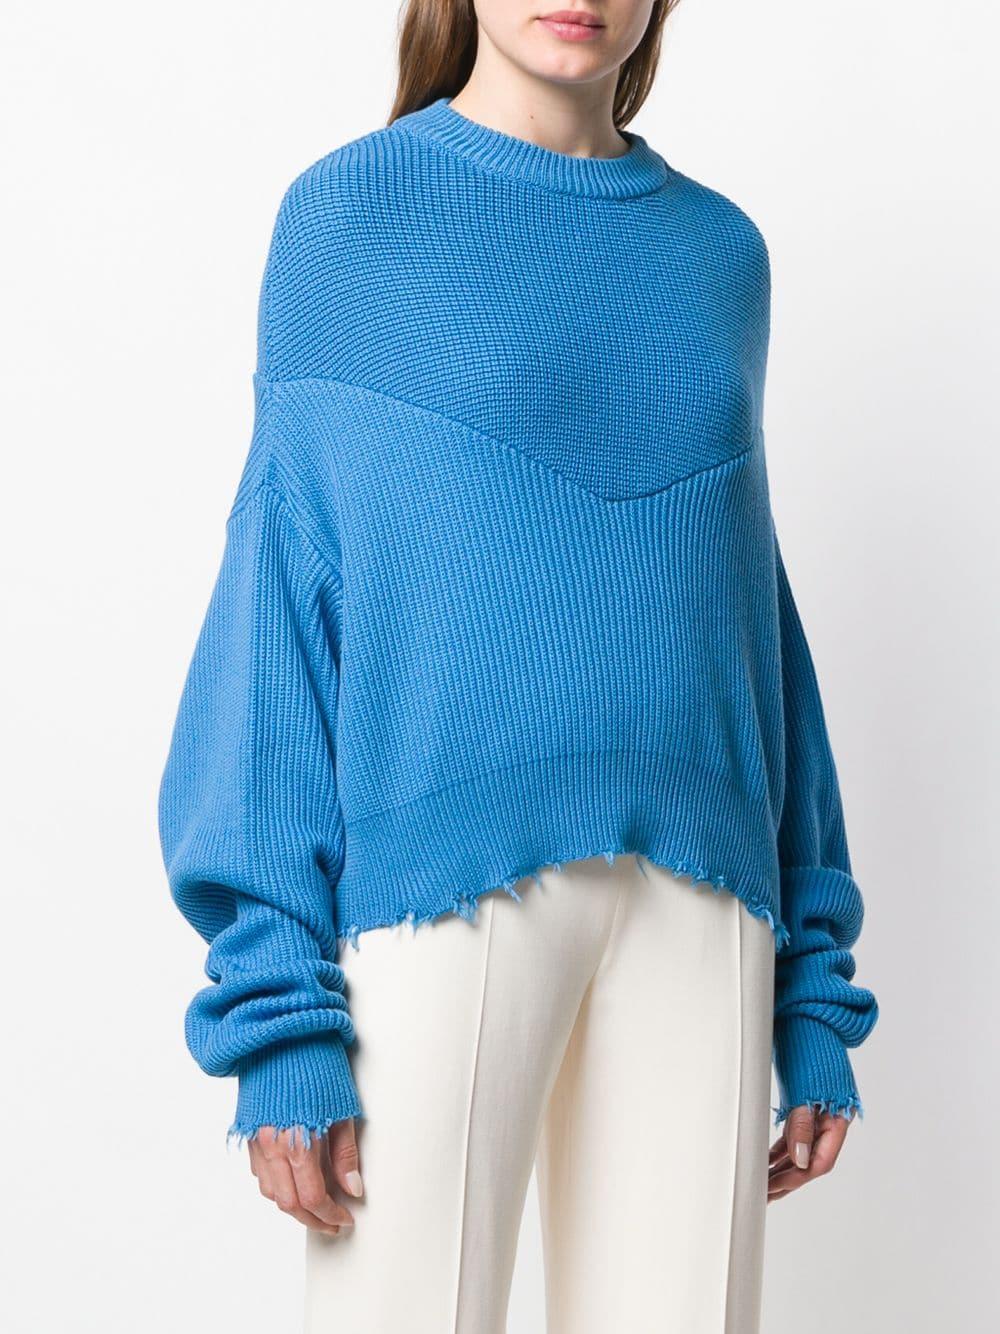 Unravel Project Cashmere Long-sleeve Draped Sweater in Blue - Lyst